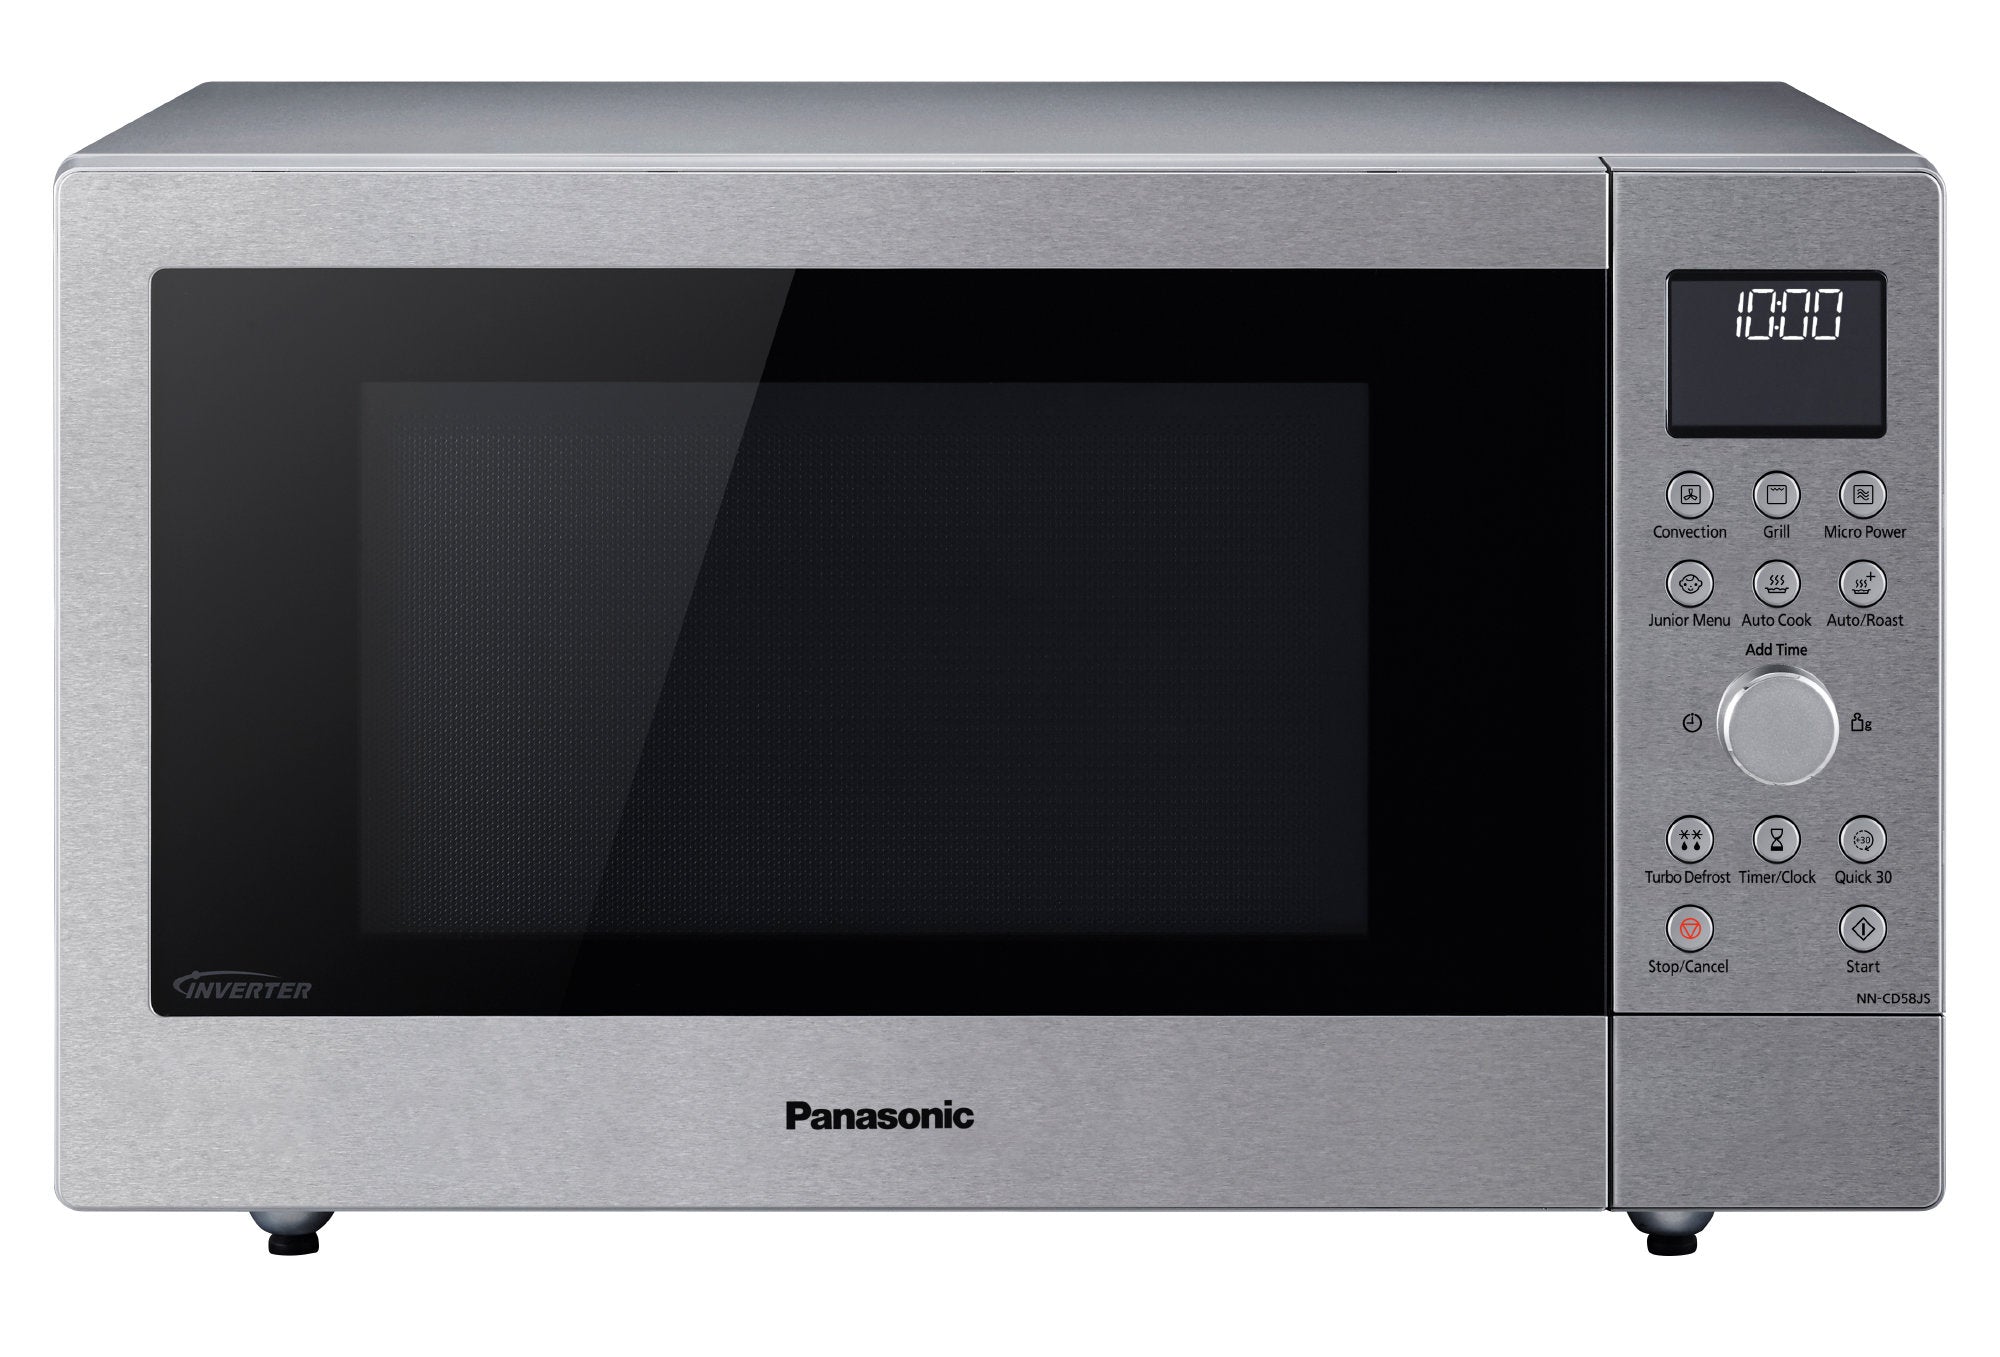 Panasonic 27L Convection Oven 1000W Microwave Oven Model NN-CD58JSQPQ